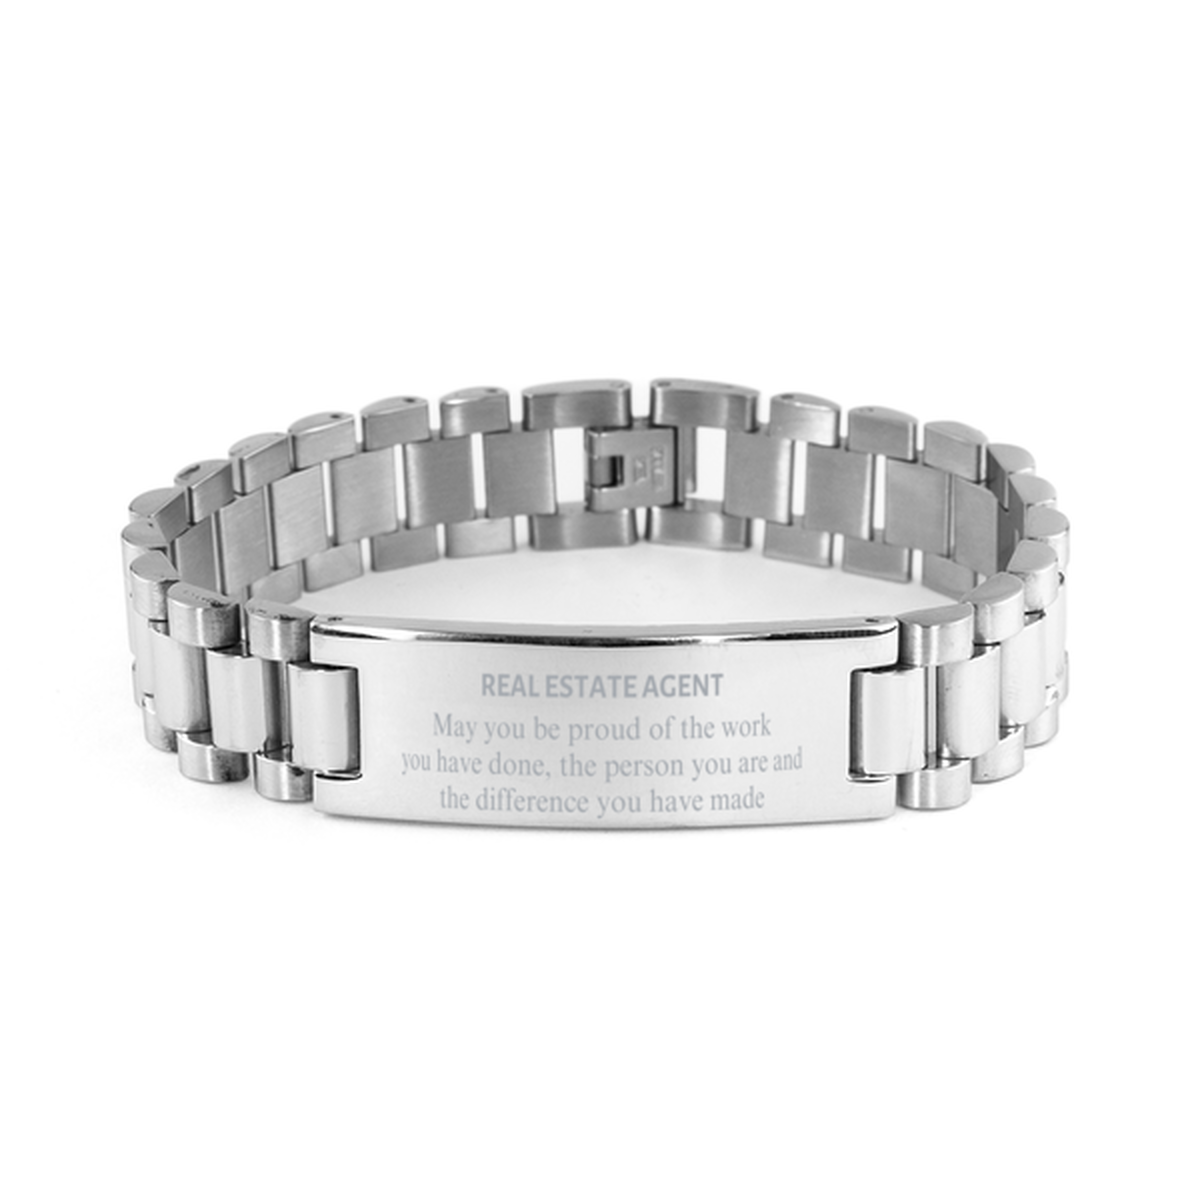 Real Estate Agent May you be proud of the work you have done, Retirement Real Estate Agent Ladder Stainless Steel Bracelet for Colleague Appreciation Gifts Amazing for Real Estate Agent